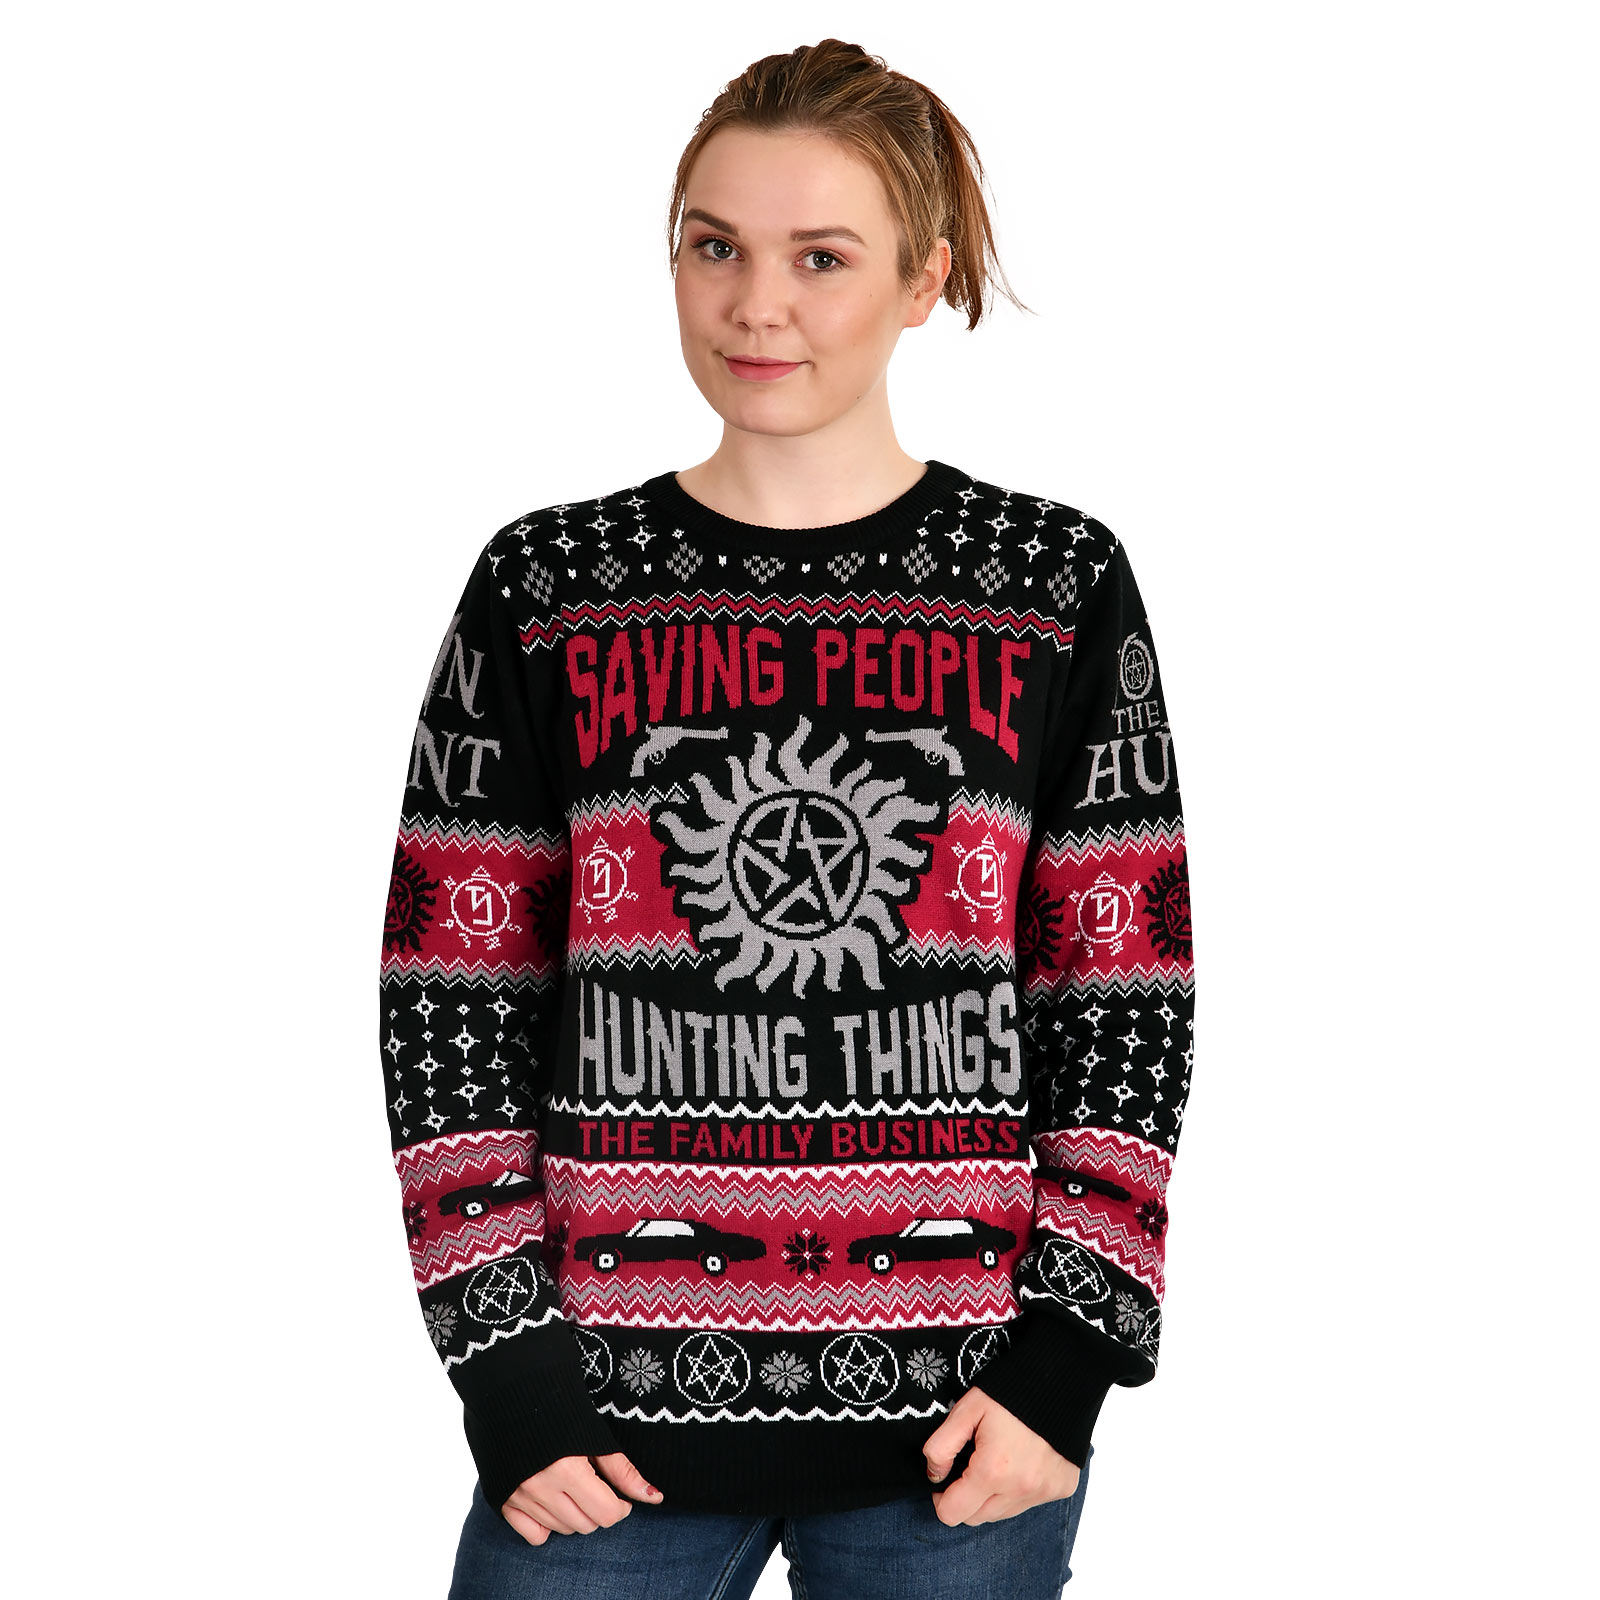 Supernatural - Saving People Hunting Things Knitted Sweater